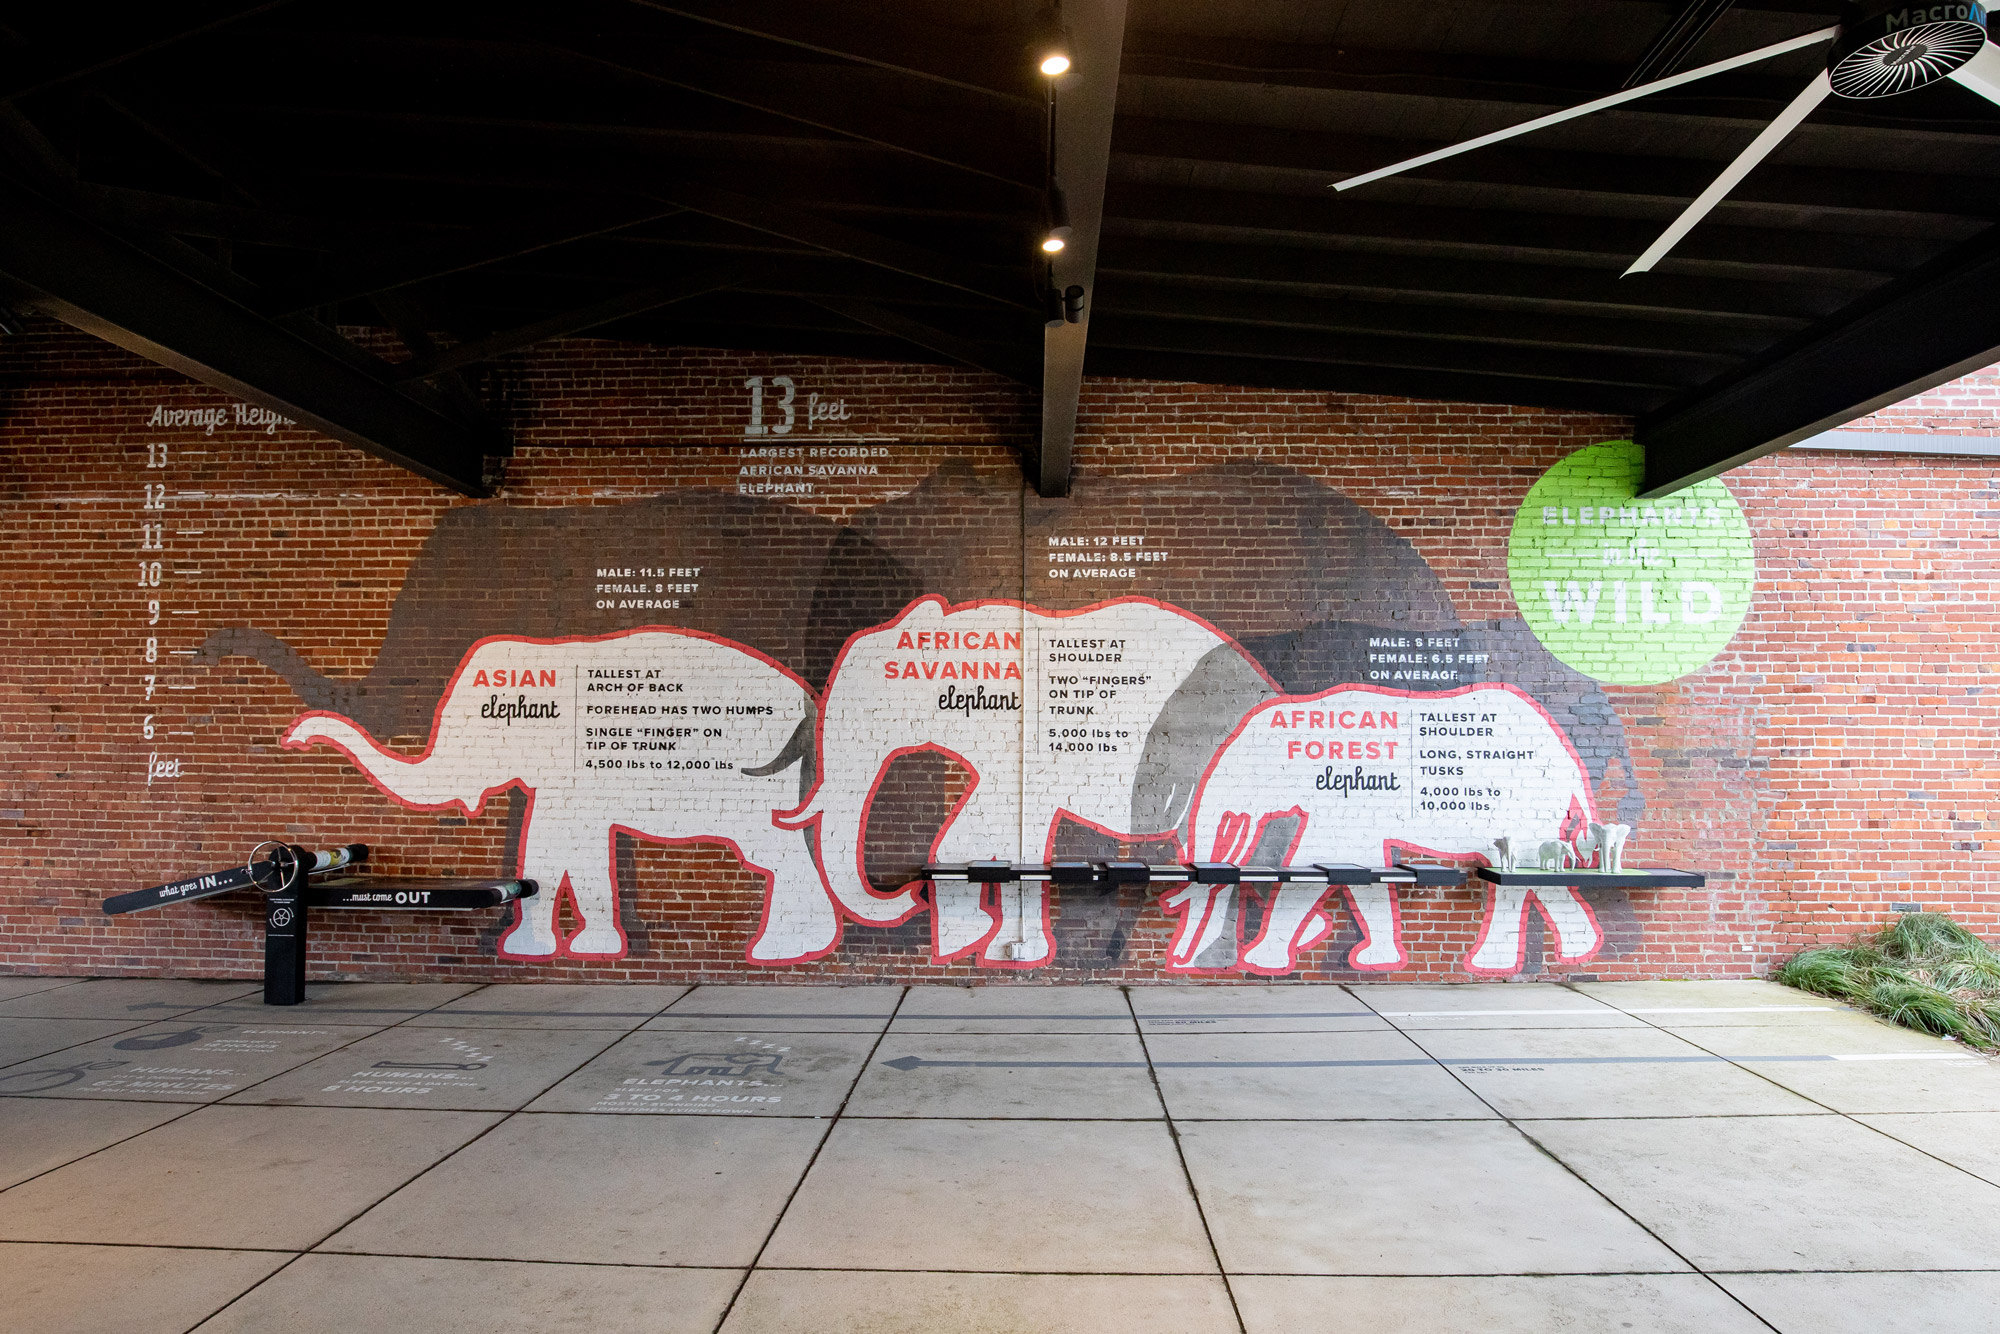 Wall information graphics on elephant specie